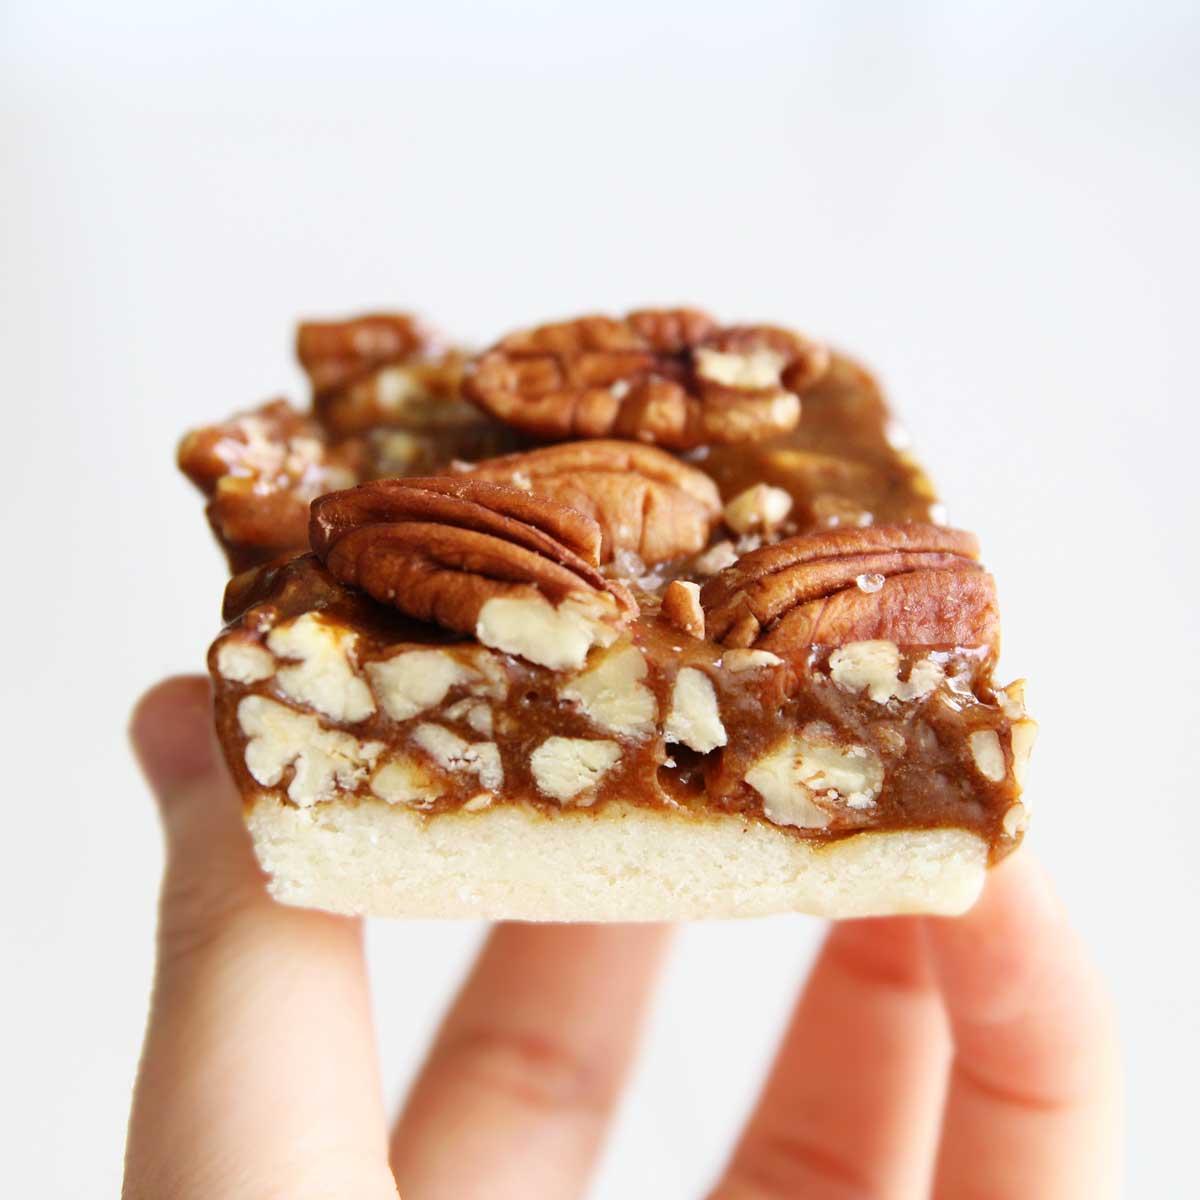 Collagen Peptides Pecan Pie Bars (Easy, No-Bake Recipe) - Peppermint Whipped Cream